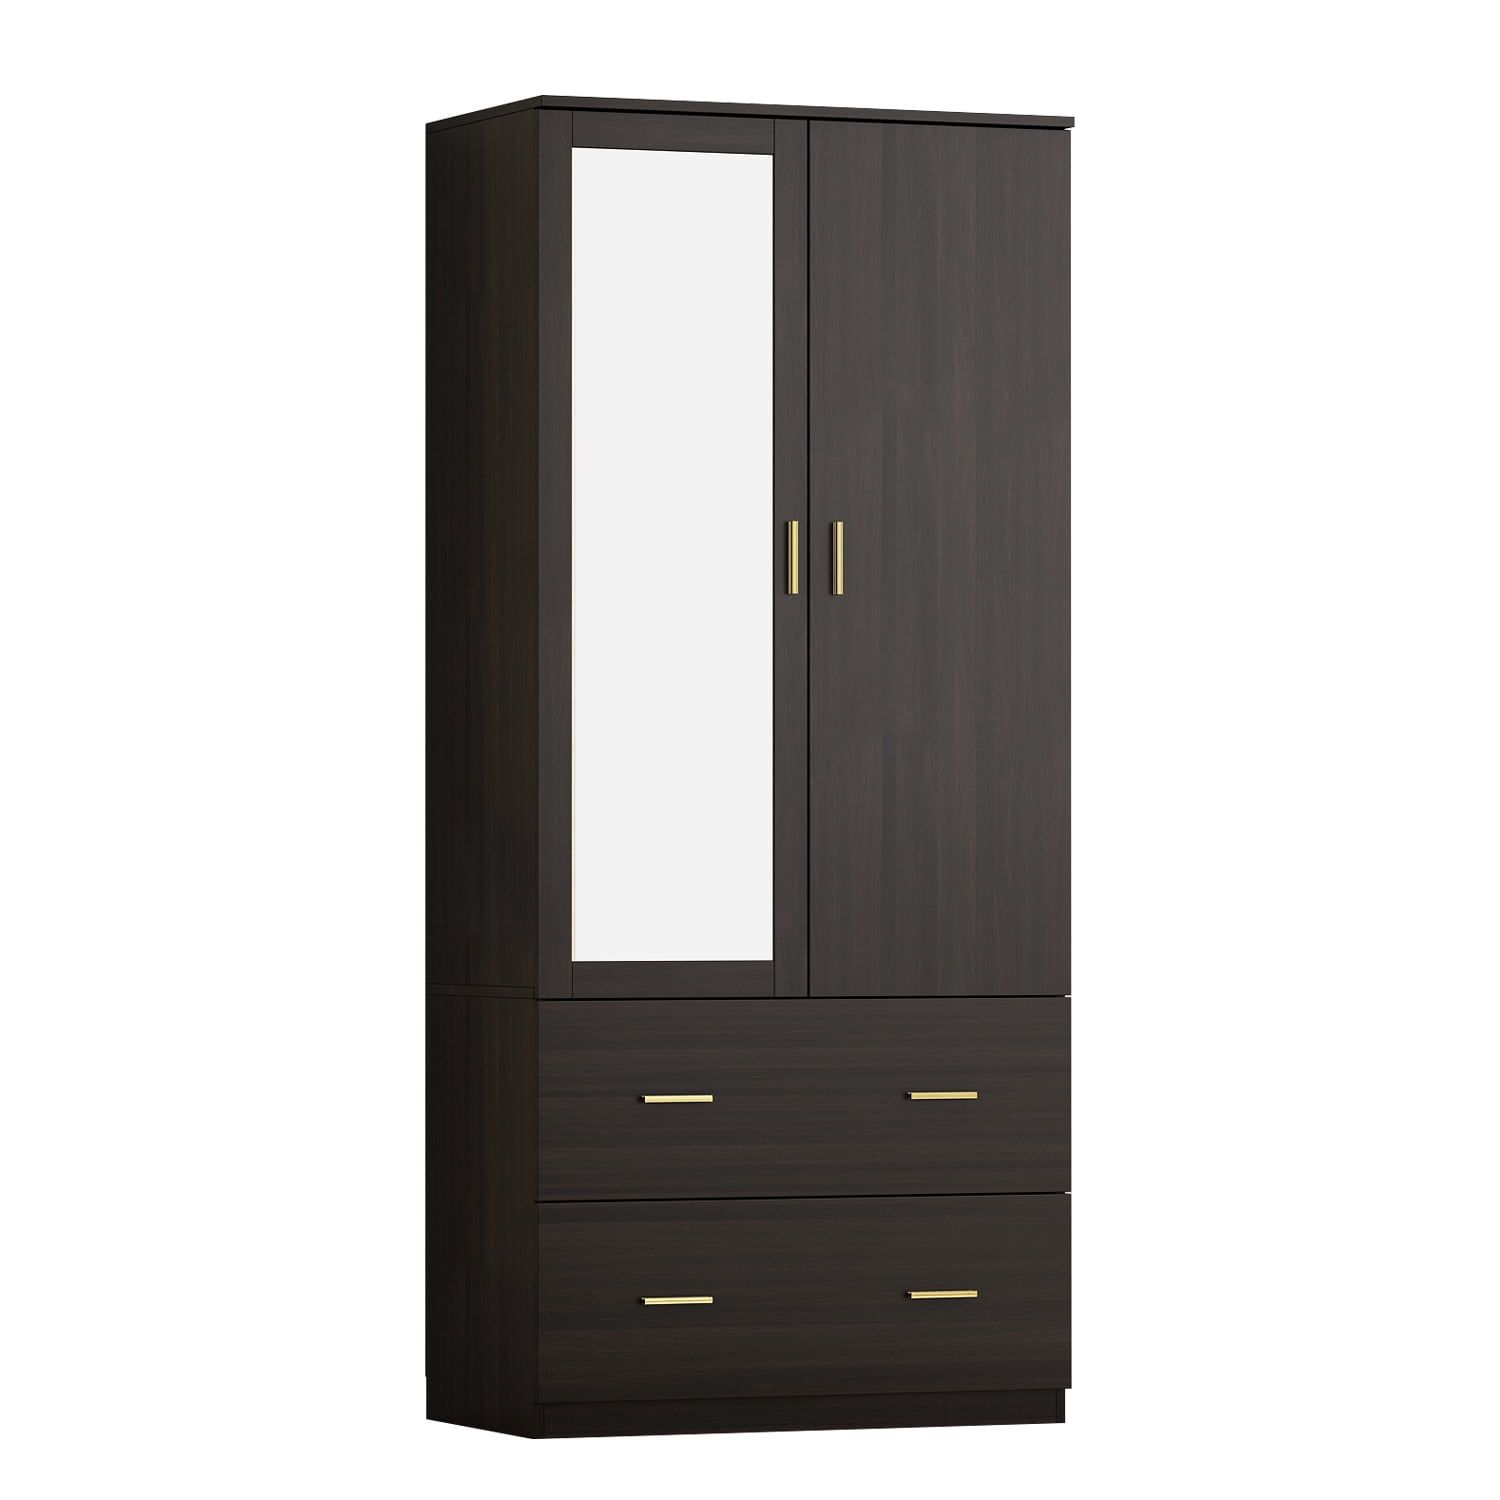 Hitow 2 Door Wardrobe Armoire Closet With Two Drawers, Clothing Rod And  Shelves For Bedroom Espresso – Walmart Regarding Espresso Wardrobes (Photo 12 of 15)